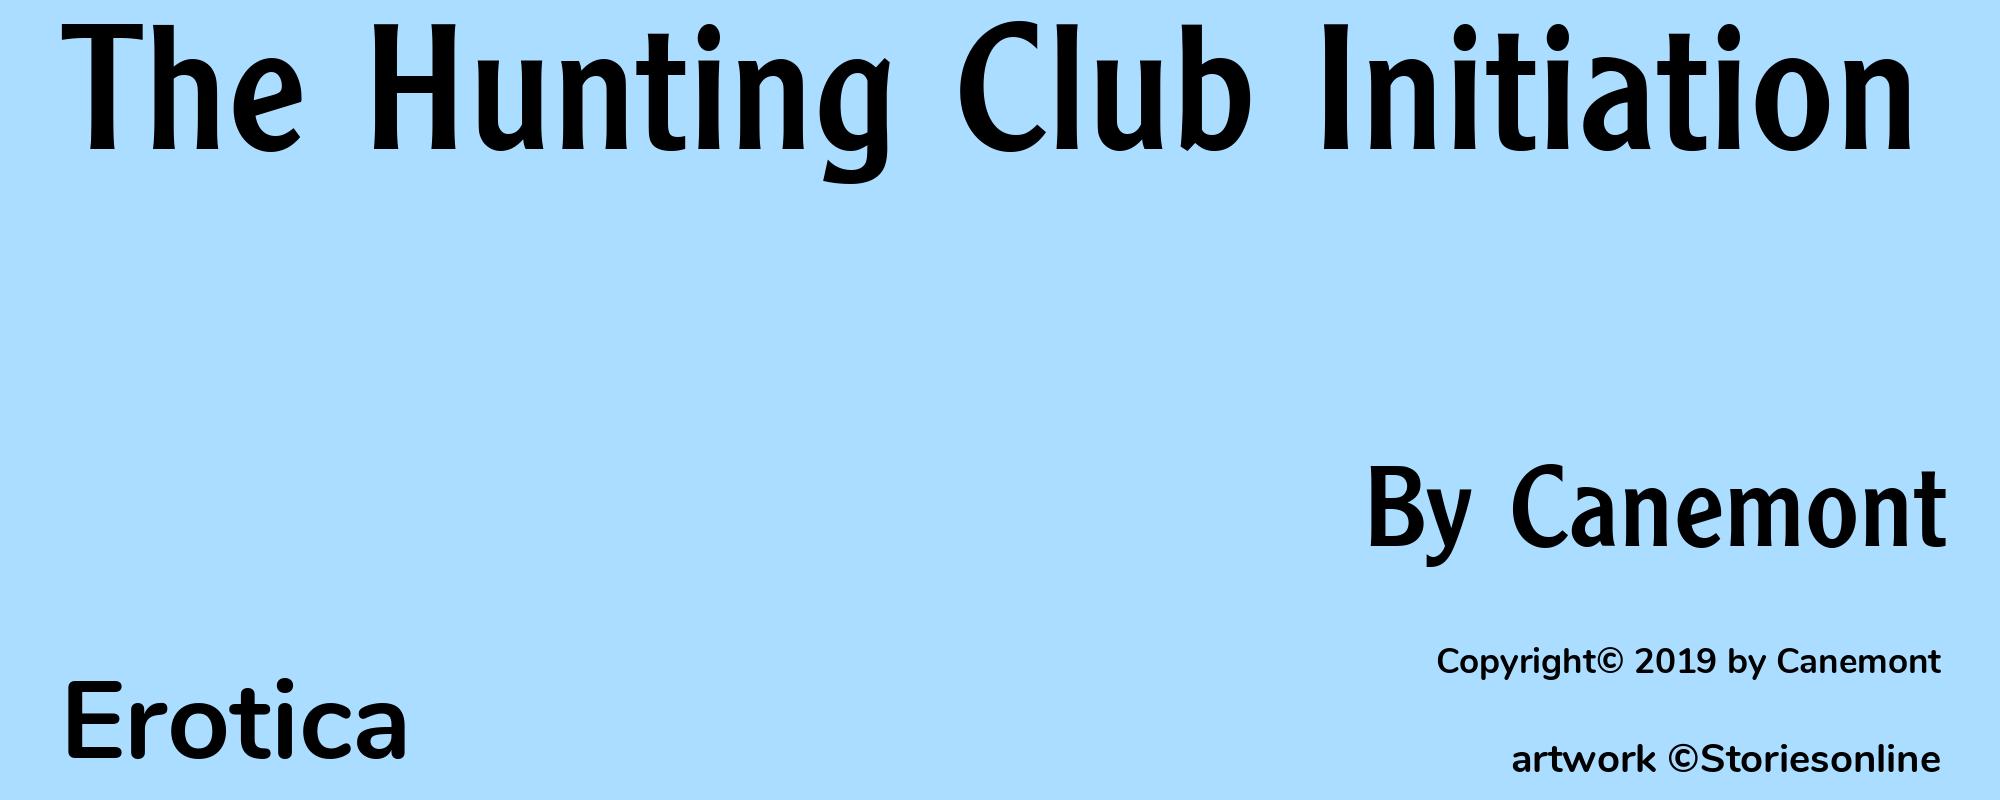 The Hunting Club Initiation - Cover